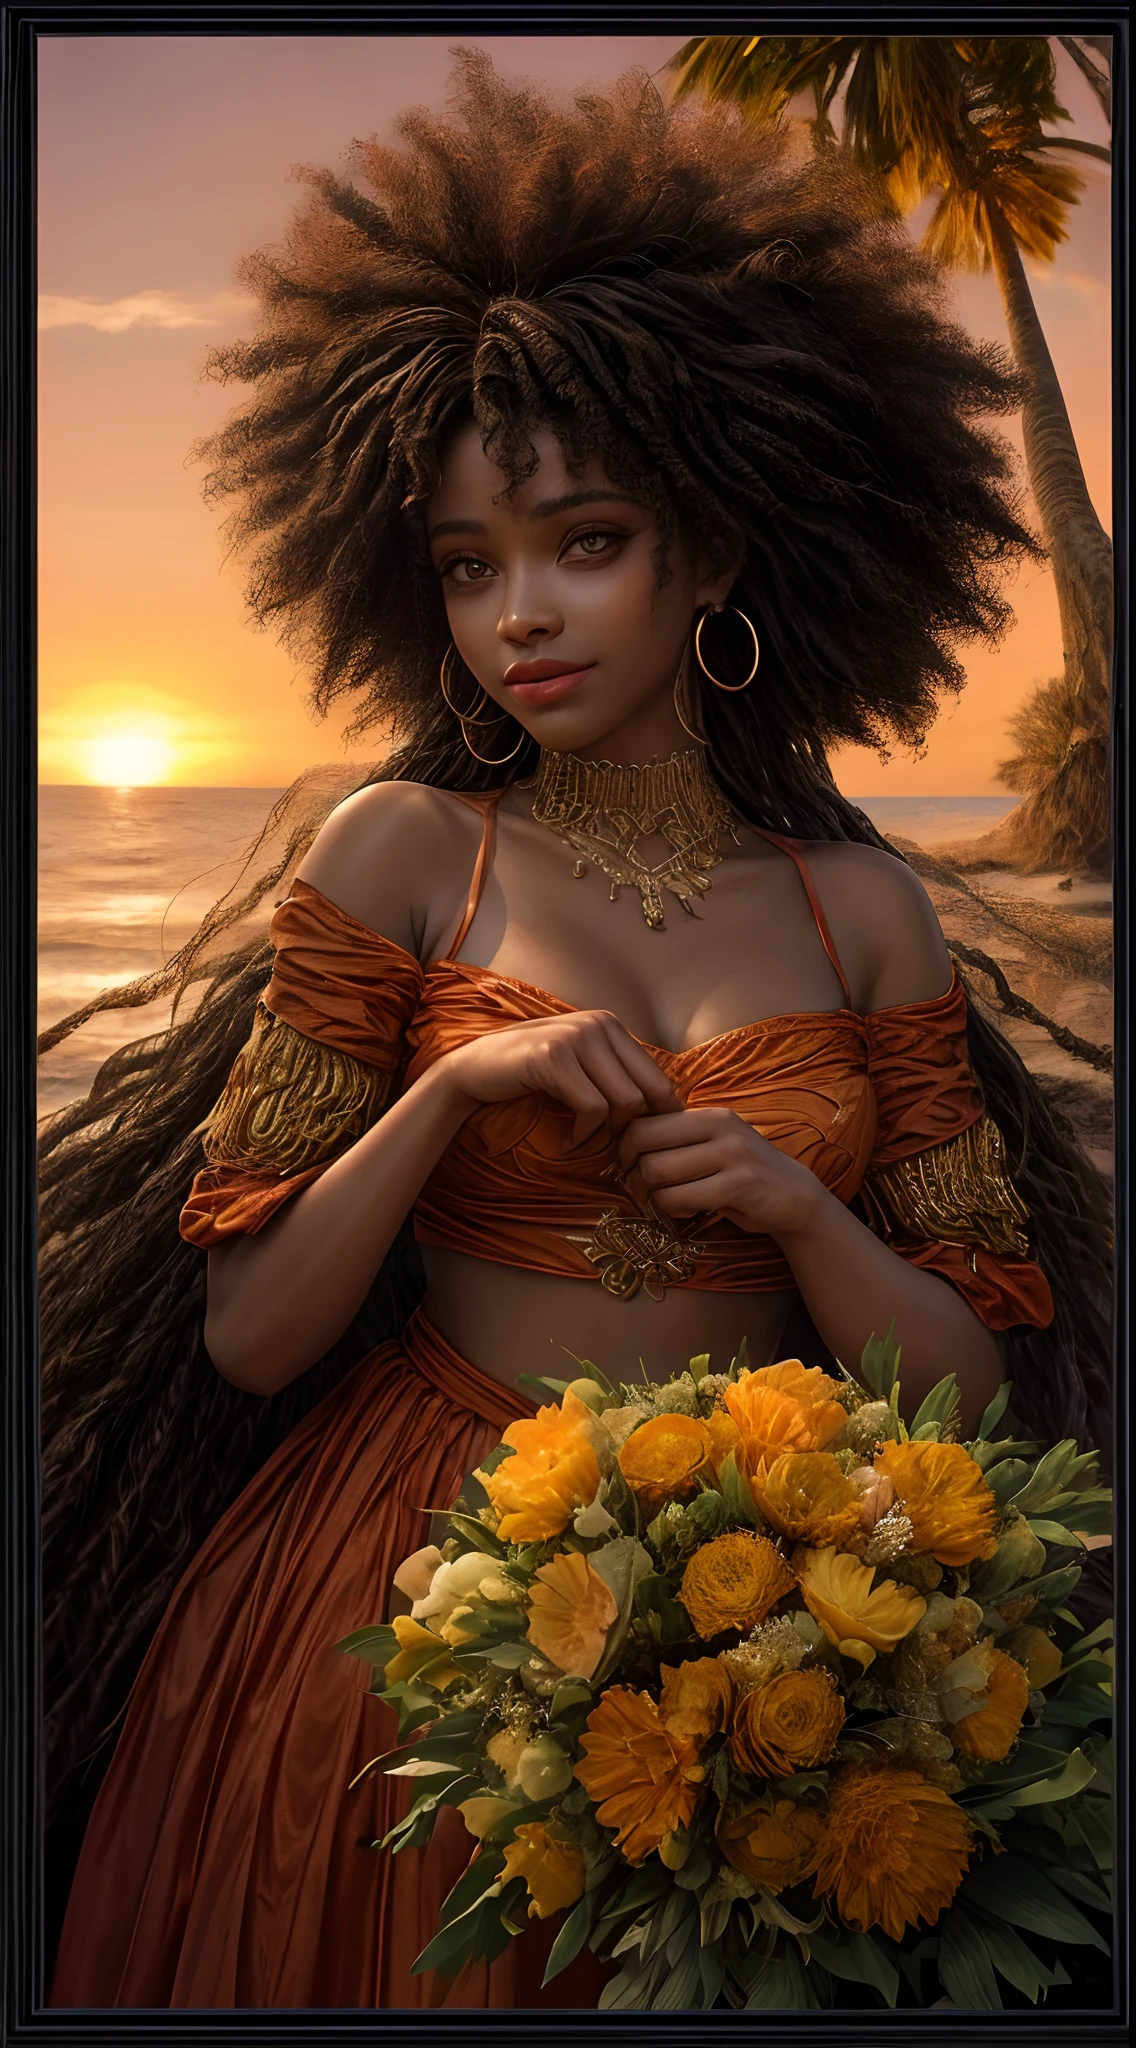 A close-up of an African-American woman&#39;s face, bathed in warm shades of orange, as if illuminated by the soft glow of a sunset, your eyes shining with joy and contentment, framed by flowing strands of hair, fot, photographed with a 35mm lens